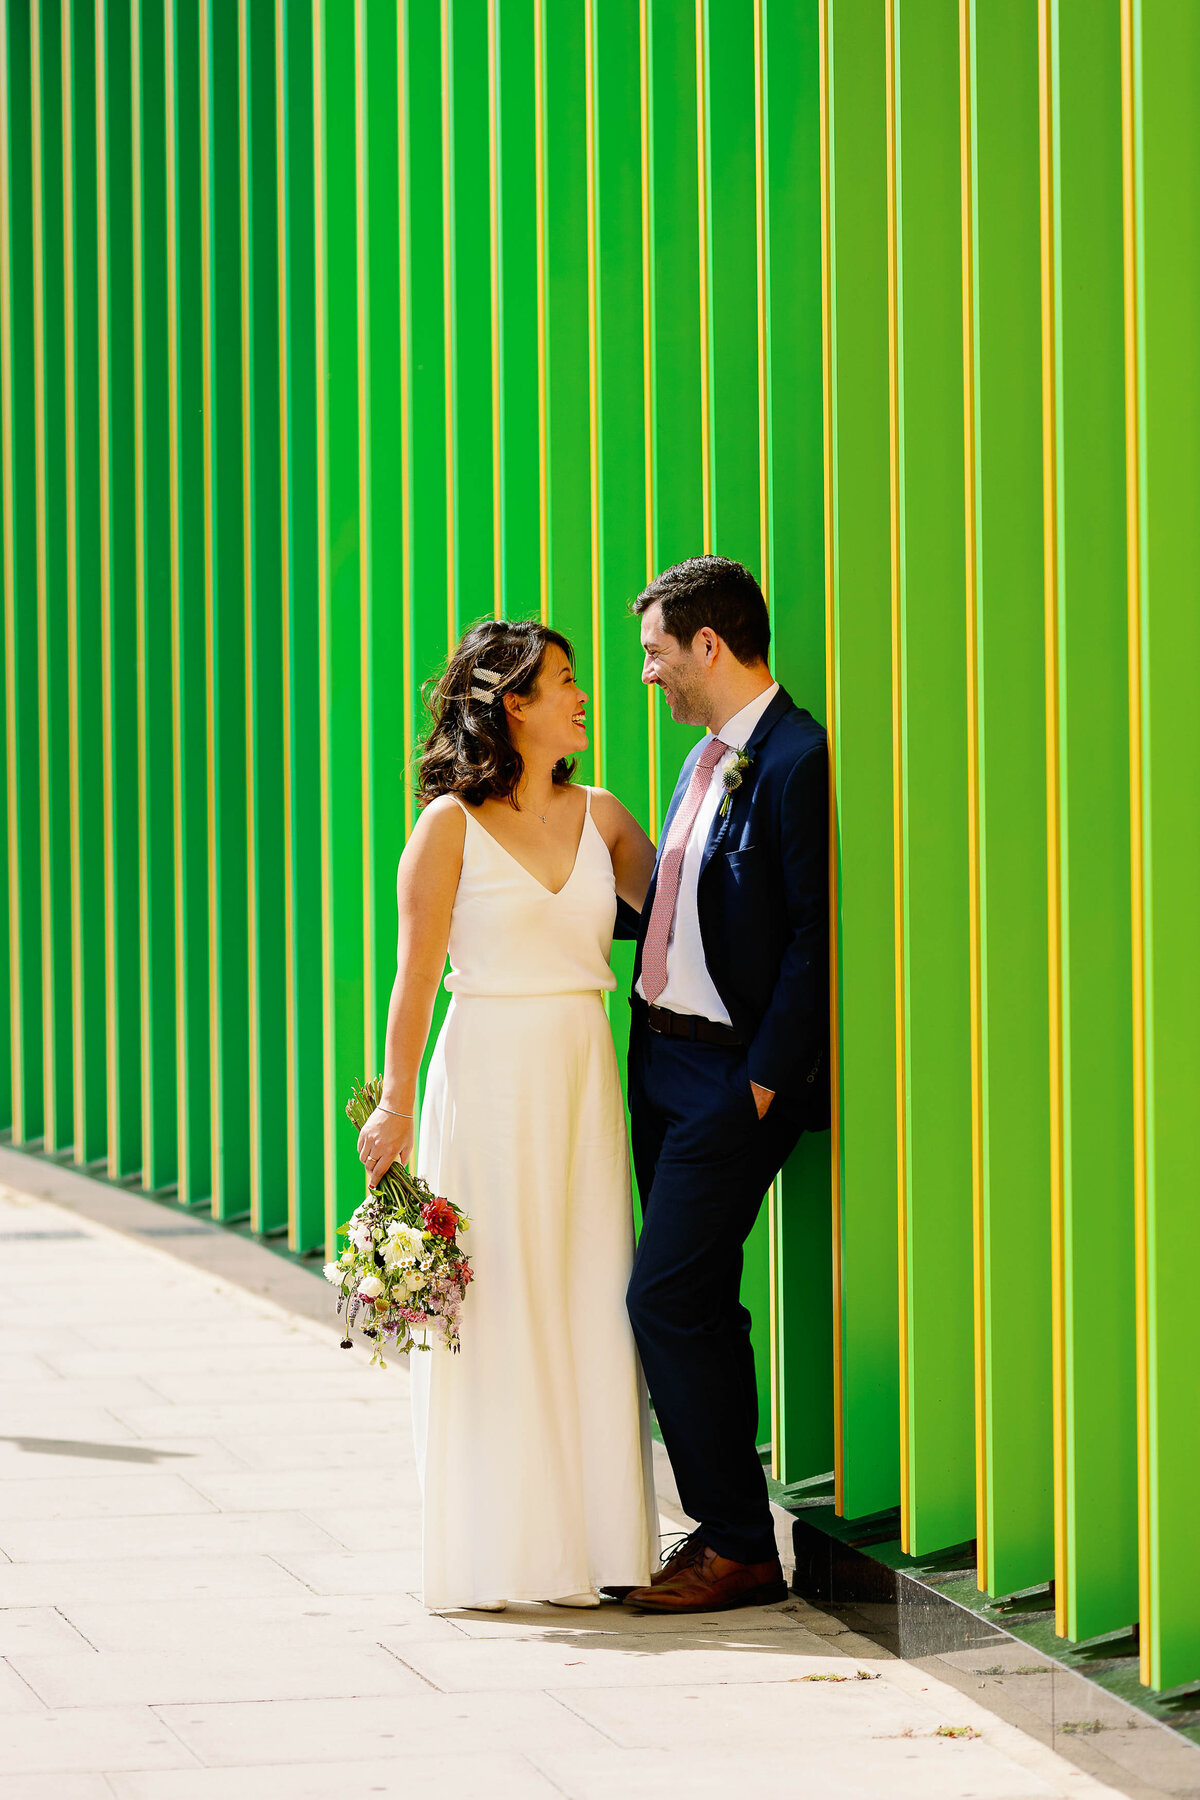 Bride and Groom stood in front of a green backdrop in London